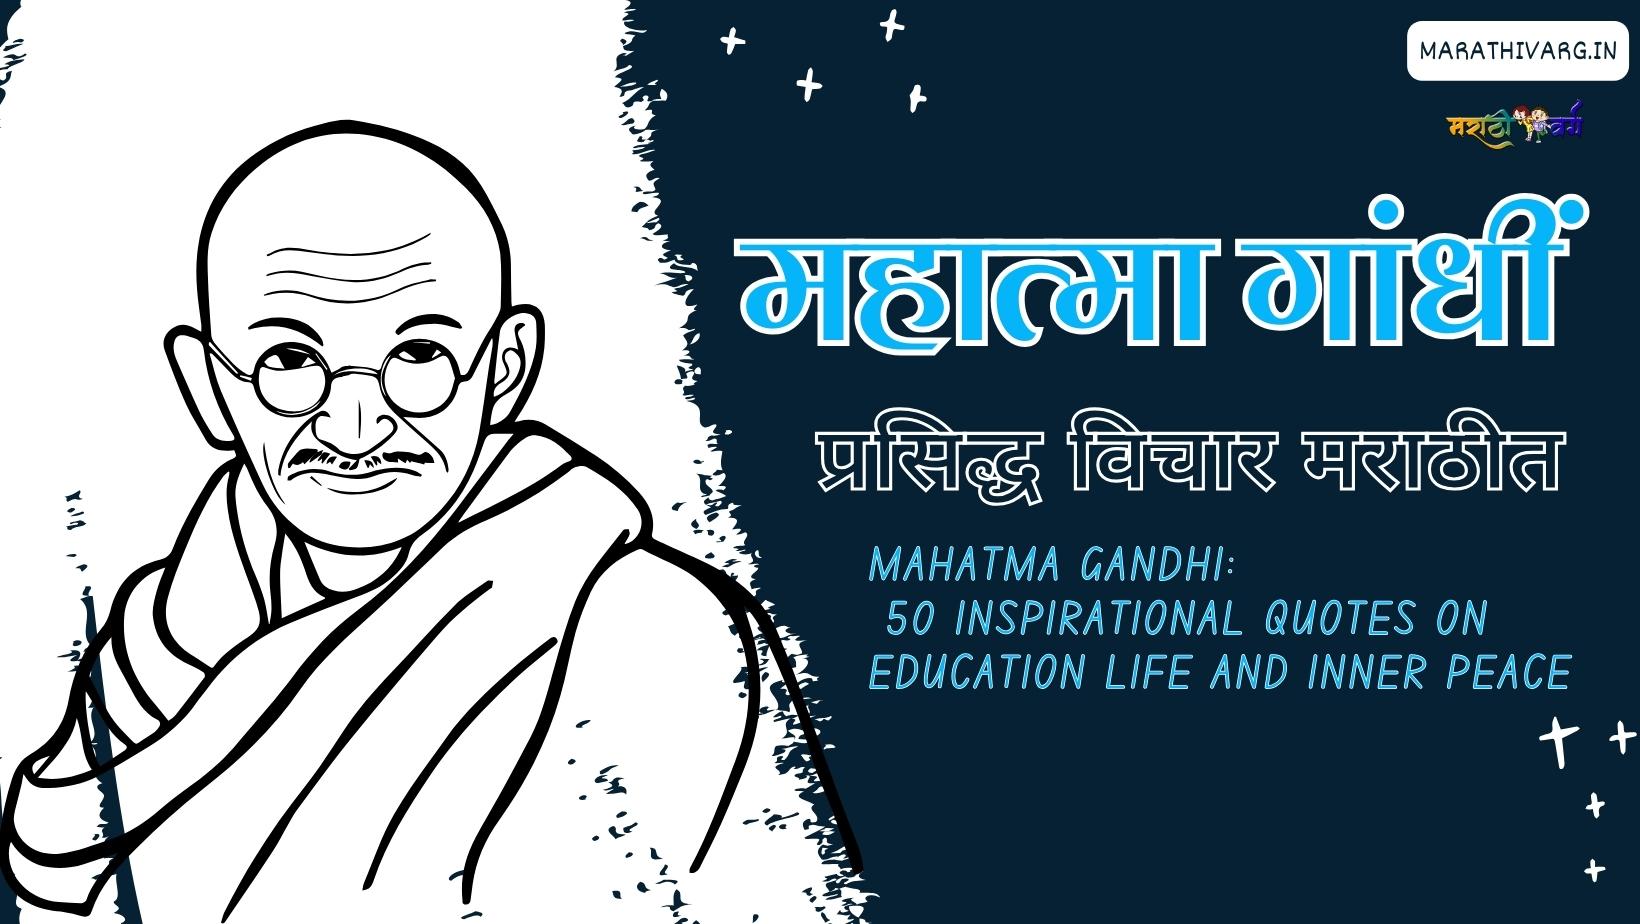 Mahatma Gandhi: 50 Inspirational Quotes on Education Life and Inner Peace